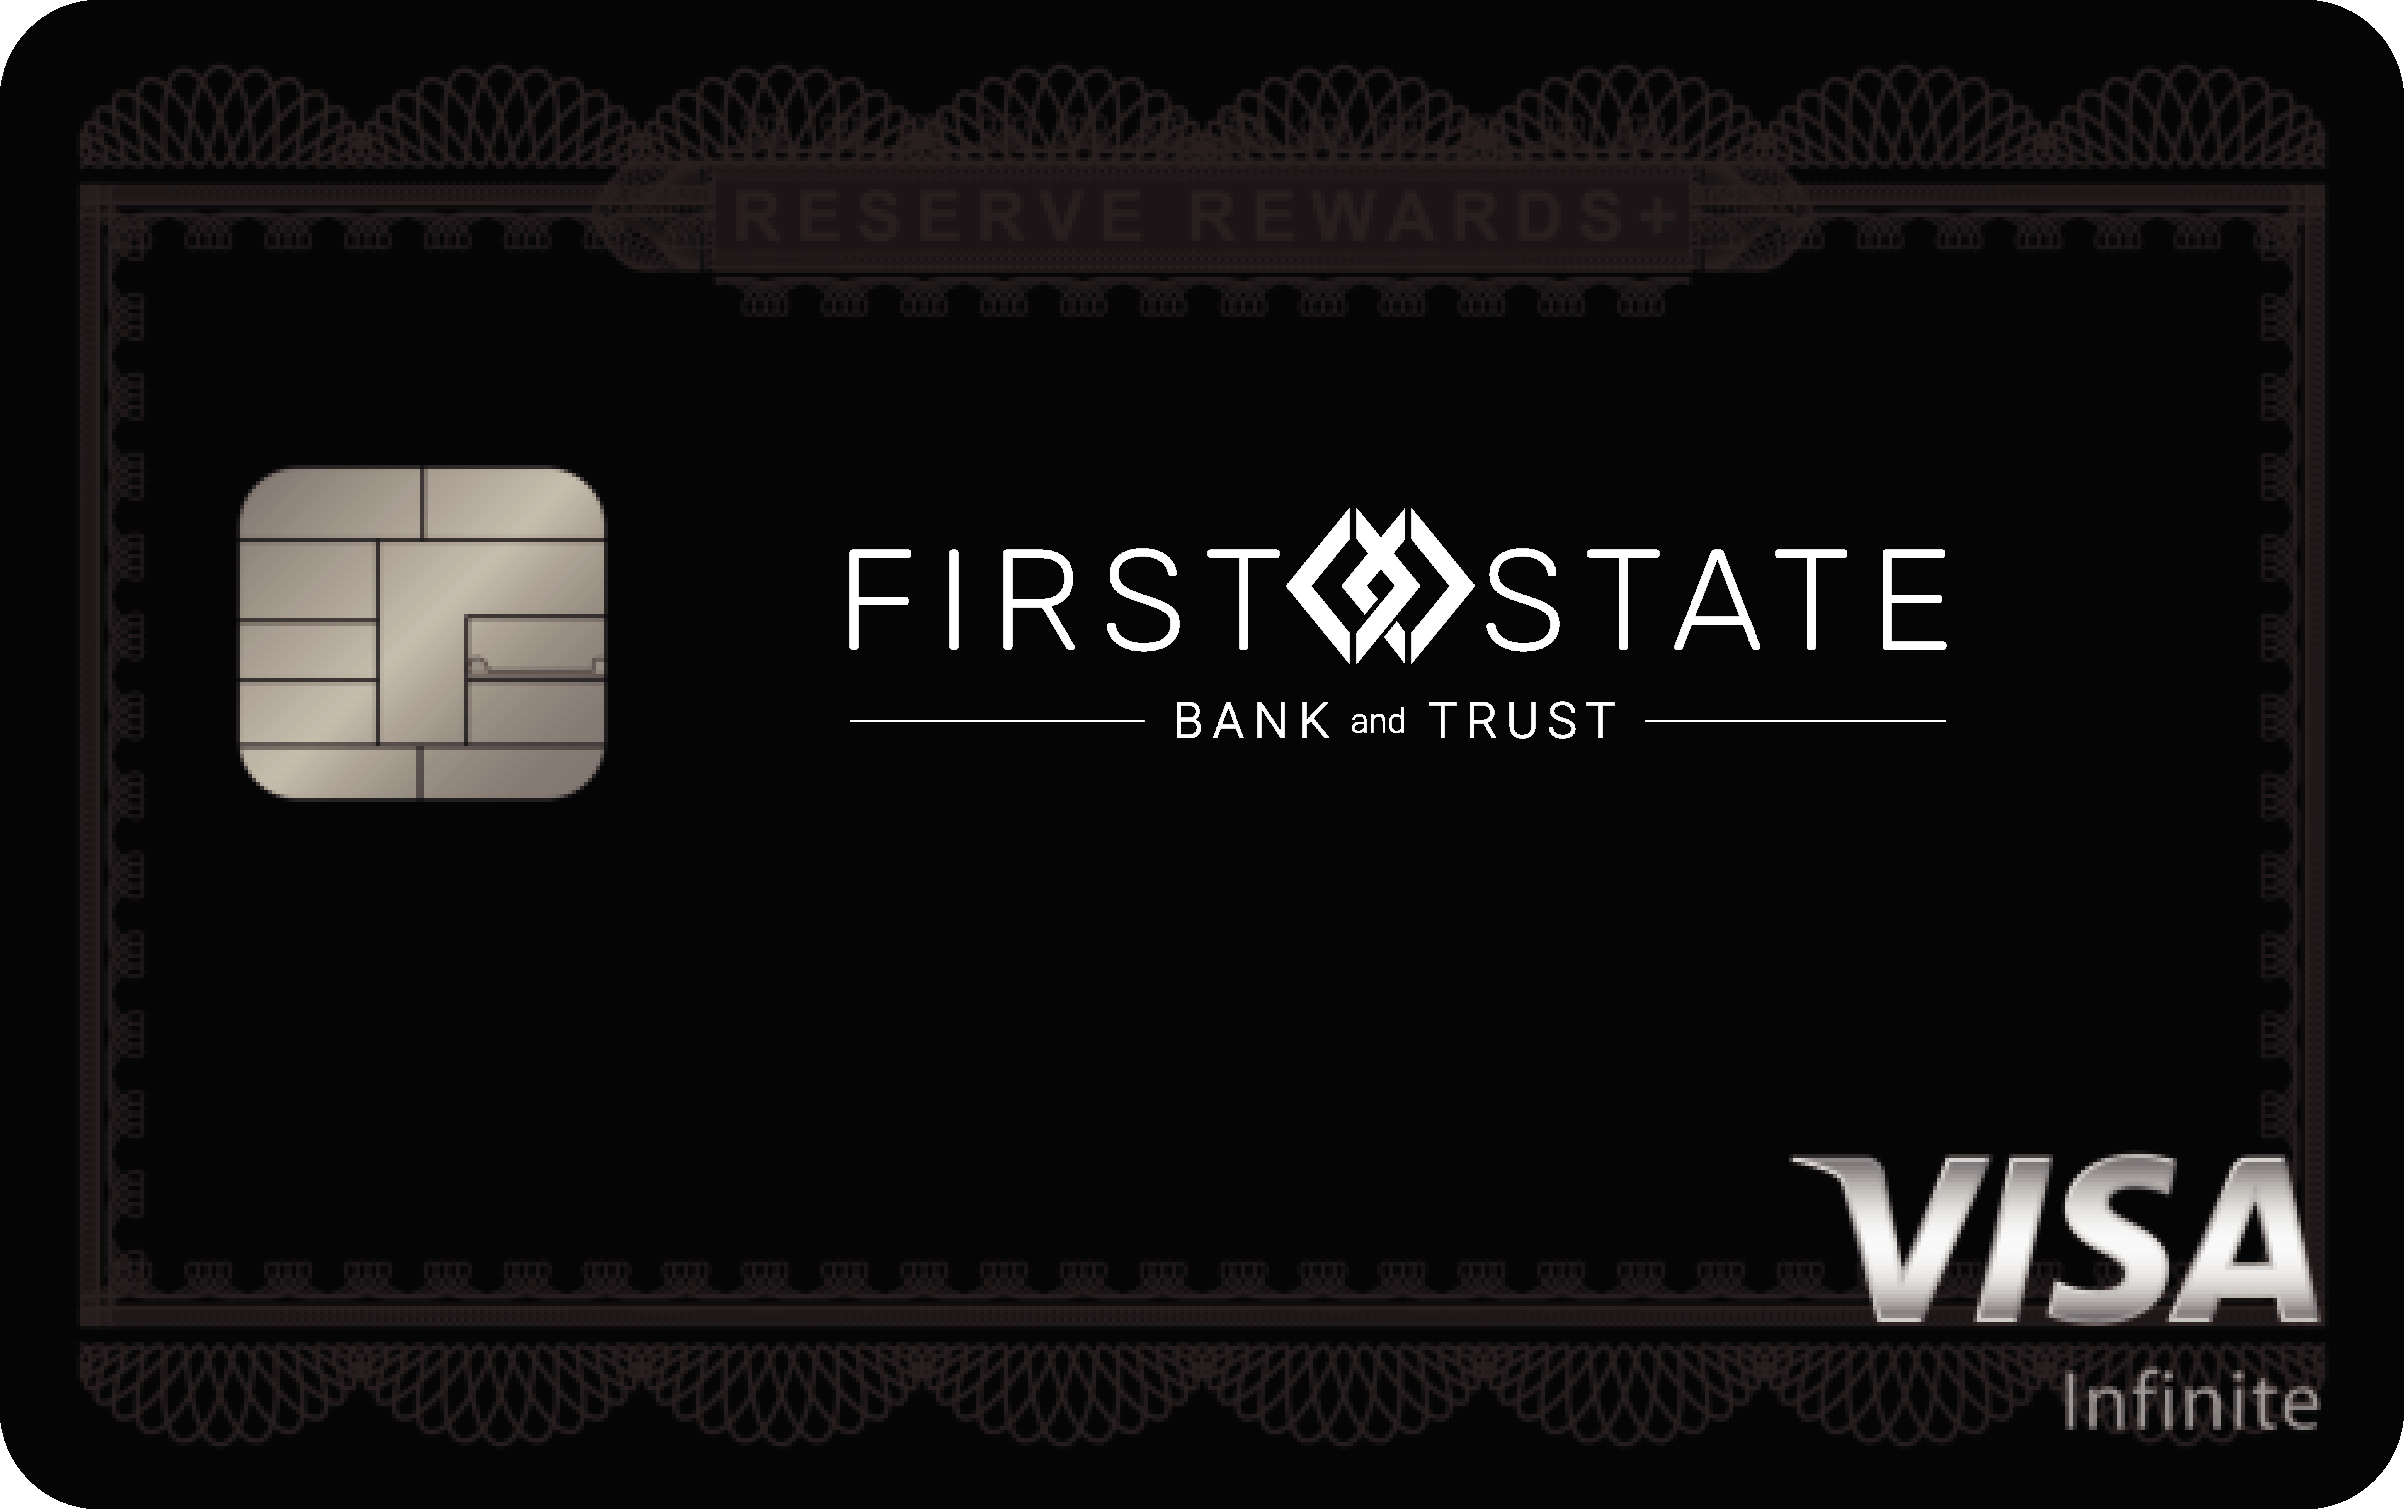 First State Bank and Trust Reserve Rewards+ Card